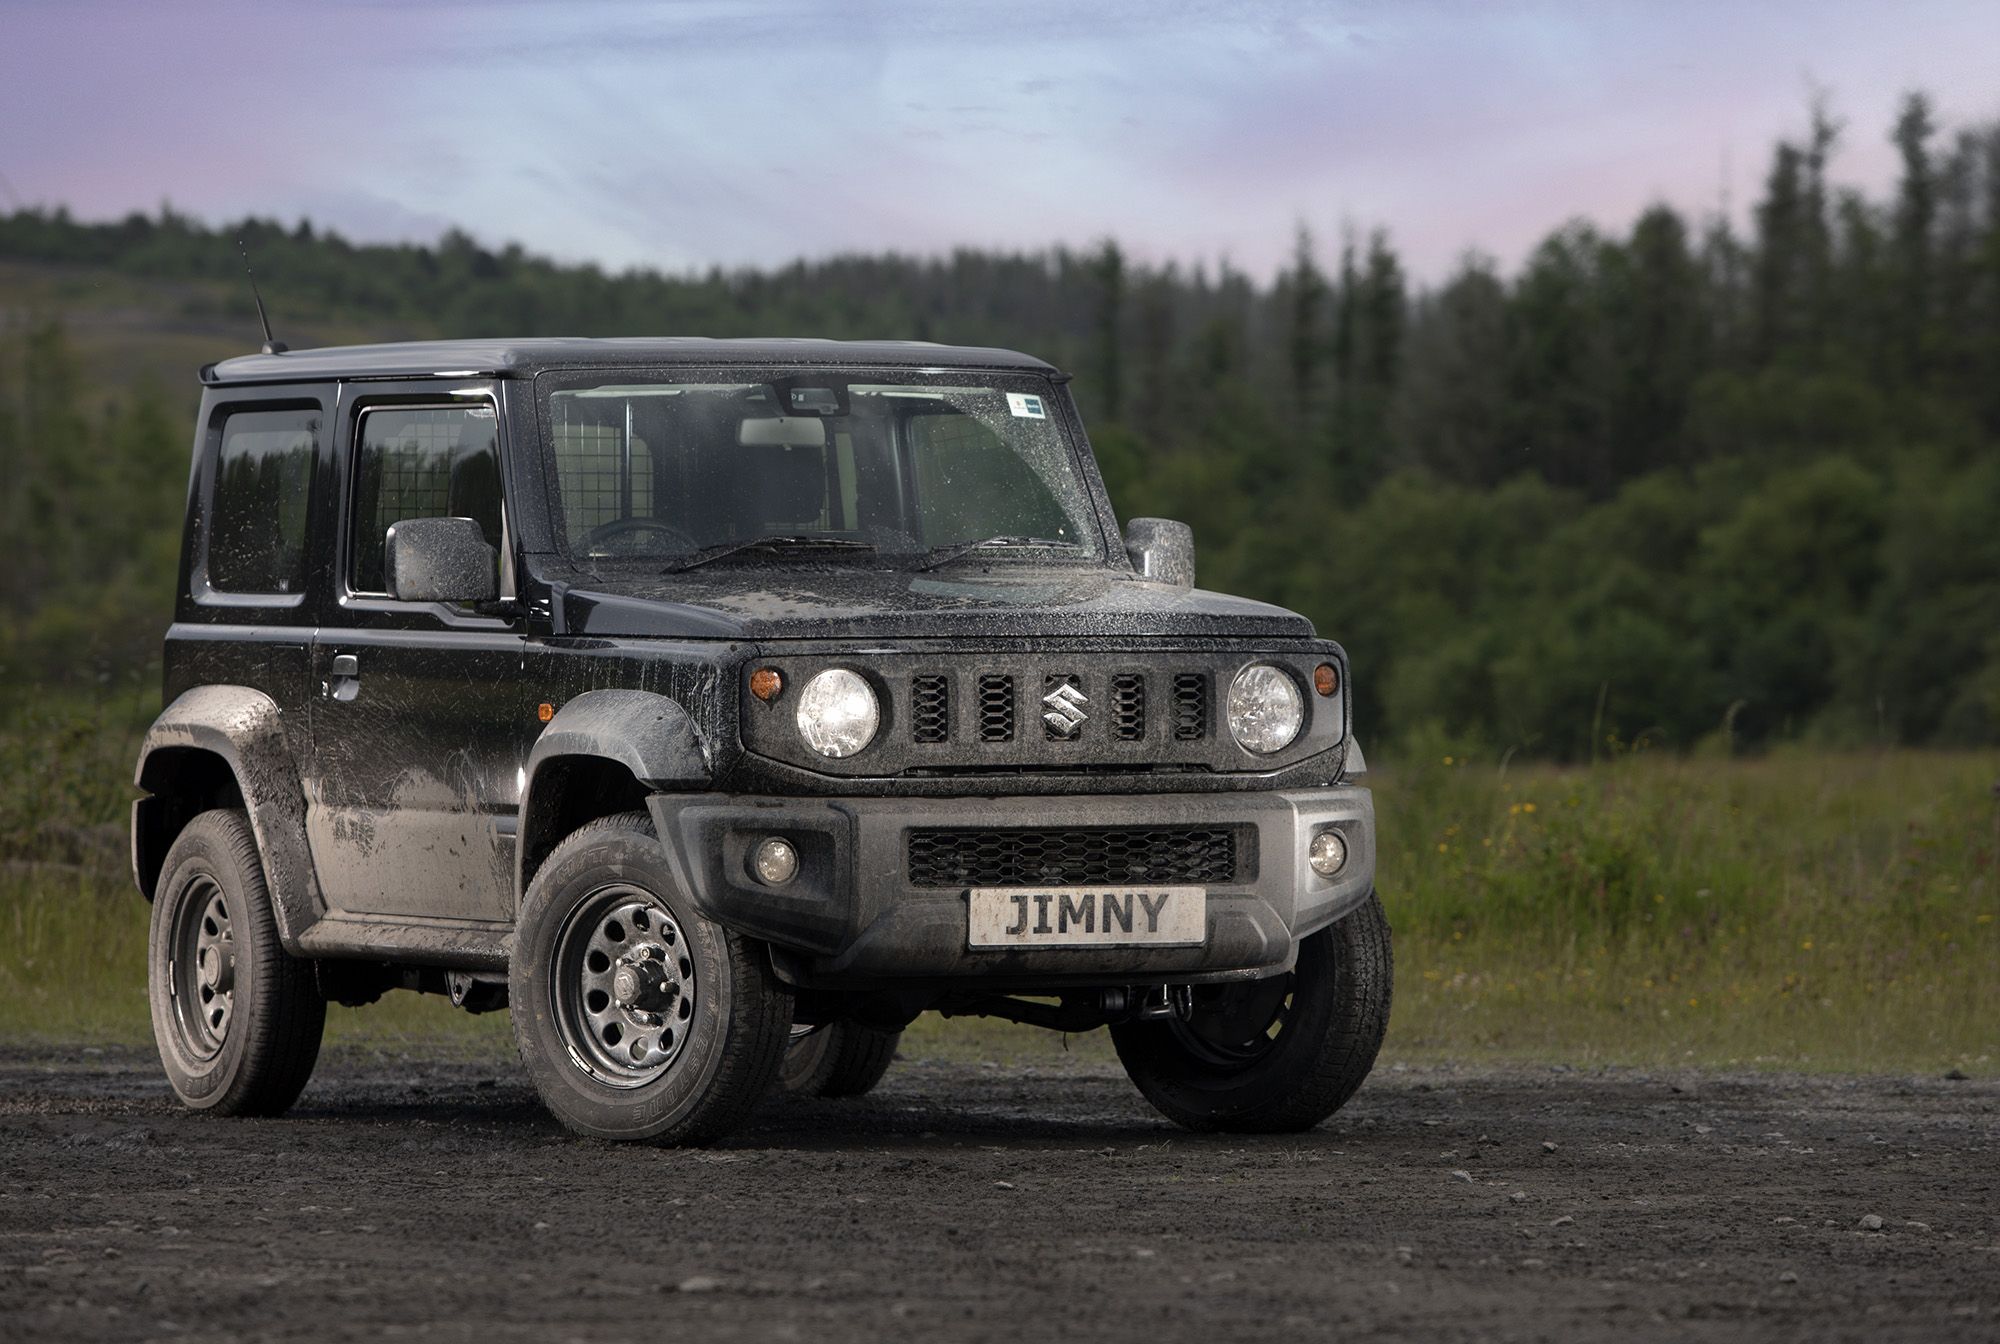 The Adorable Suzuki Jimny Is Going Electric